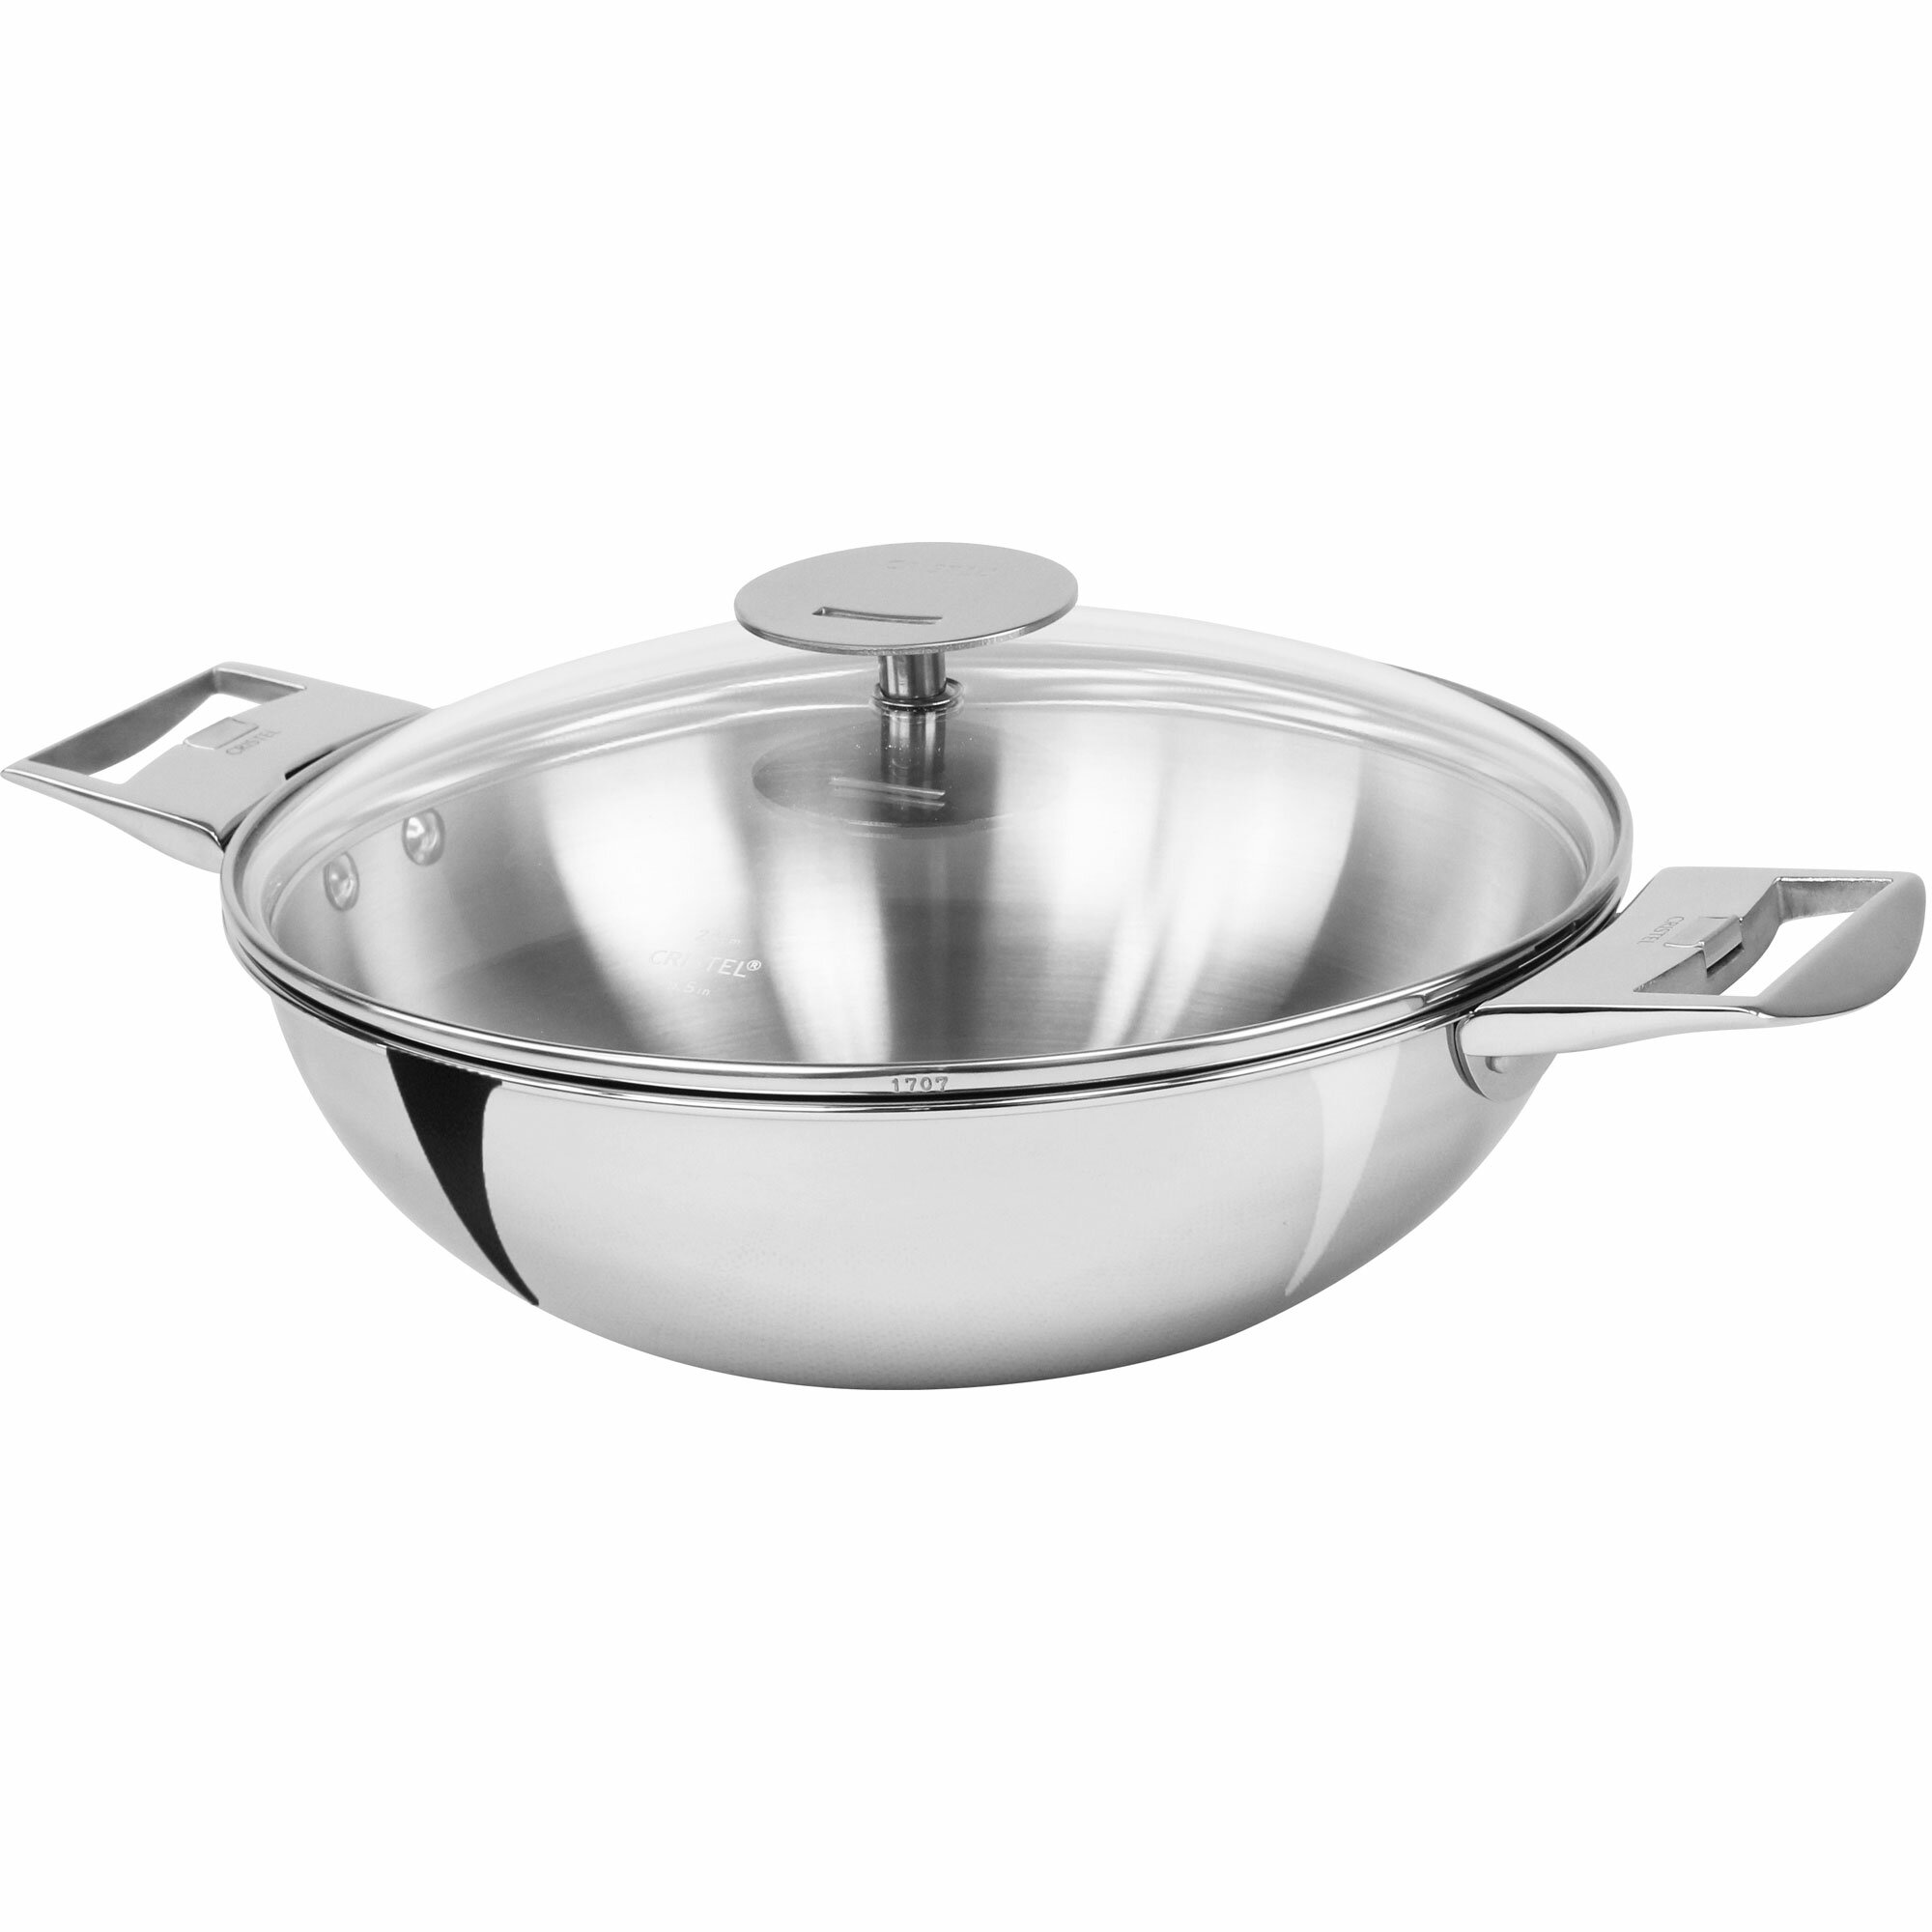 Cristel Casteline 2 qt. Stainless Steel Saucepan with Lid